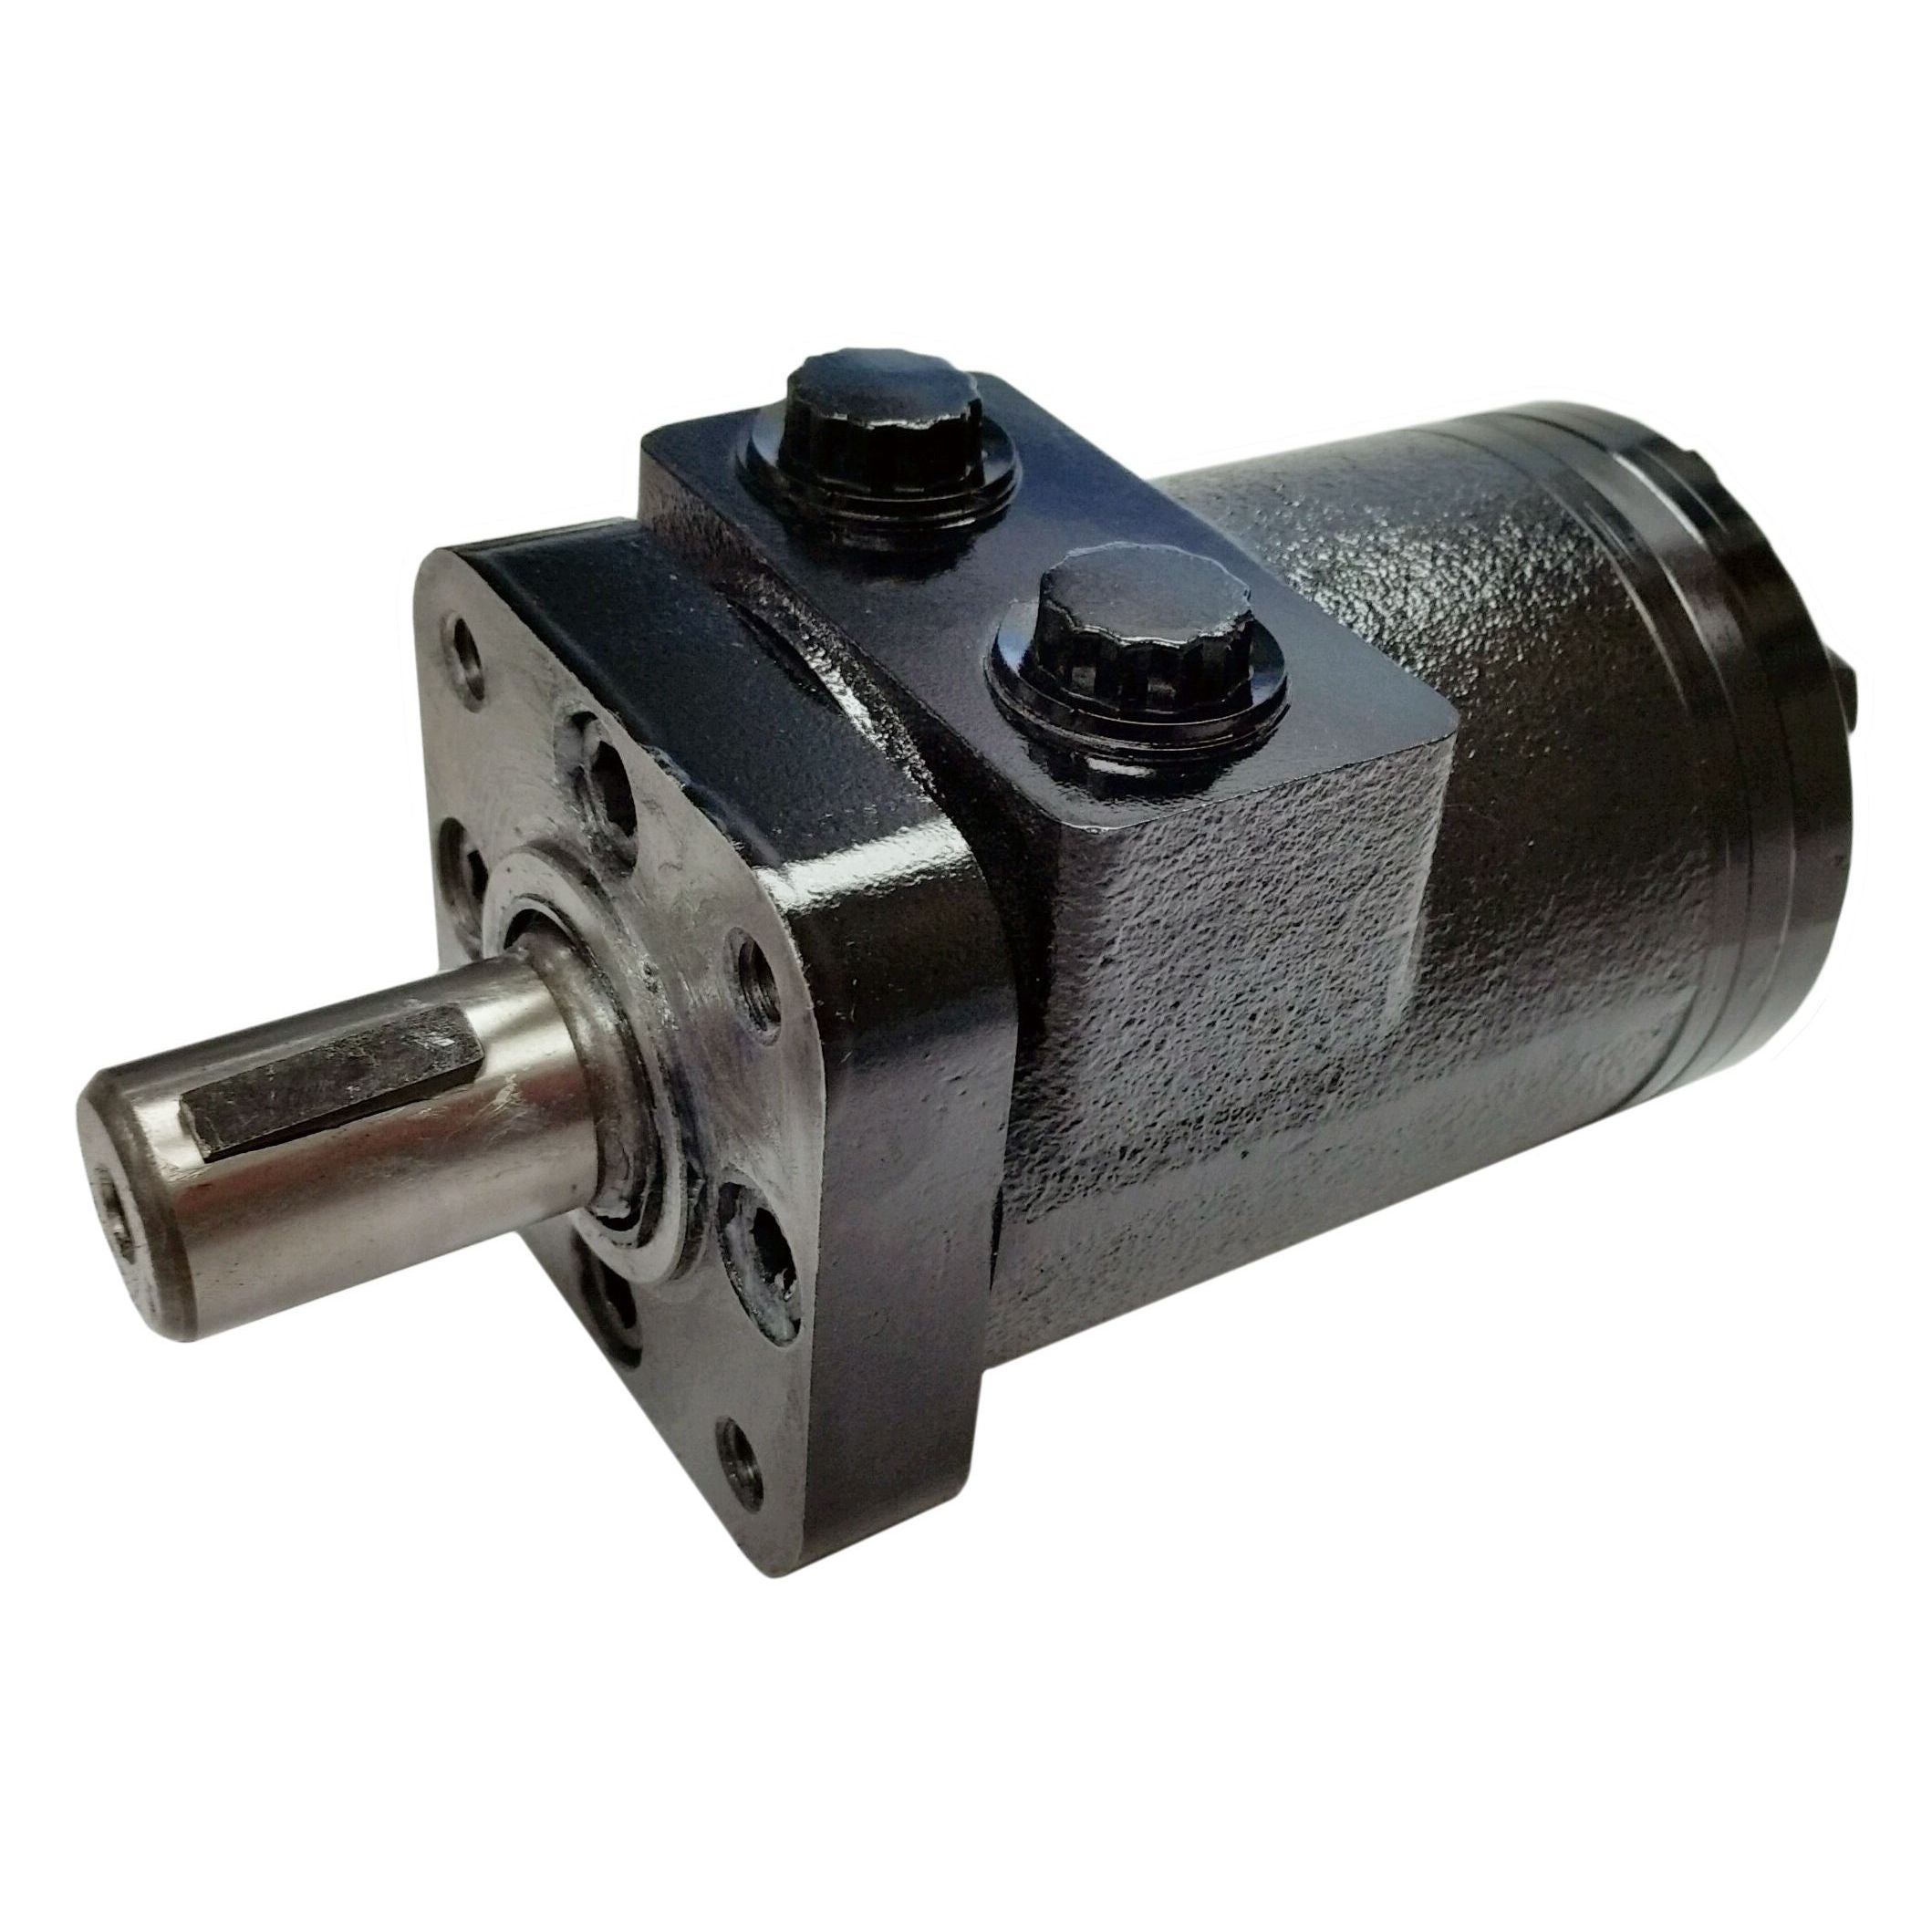 BMPH-315-H4-S-S : Dynamic LSHT Motor, 315cc, 192RPM, 3319in-lb, 1813psi Differential, 15.85GPM, SAE A 4-Bolt Mount, 6-Tooth Shaft, Side Ported, #10 SAE (5/8")